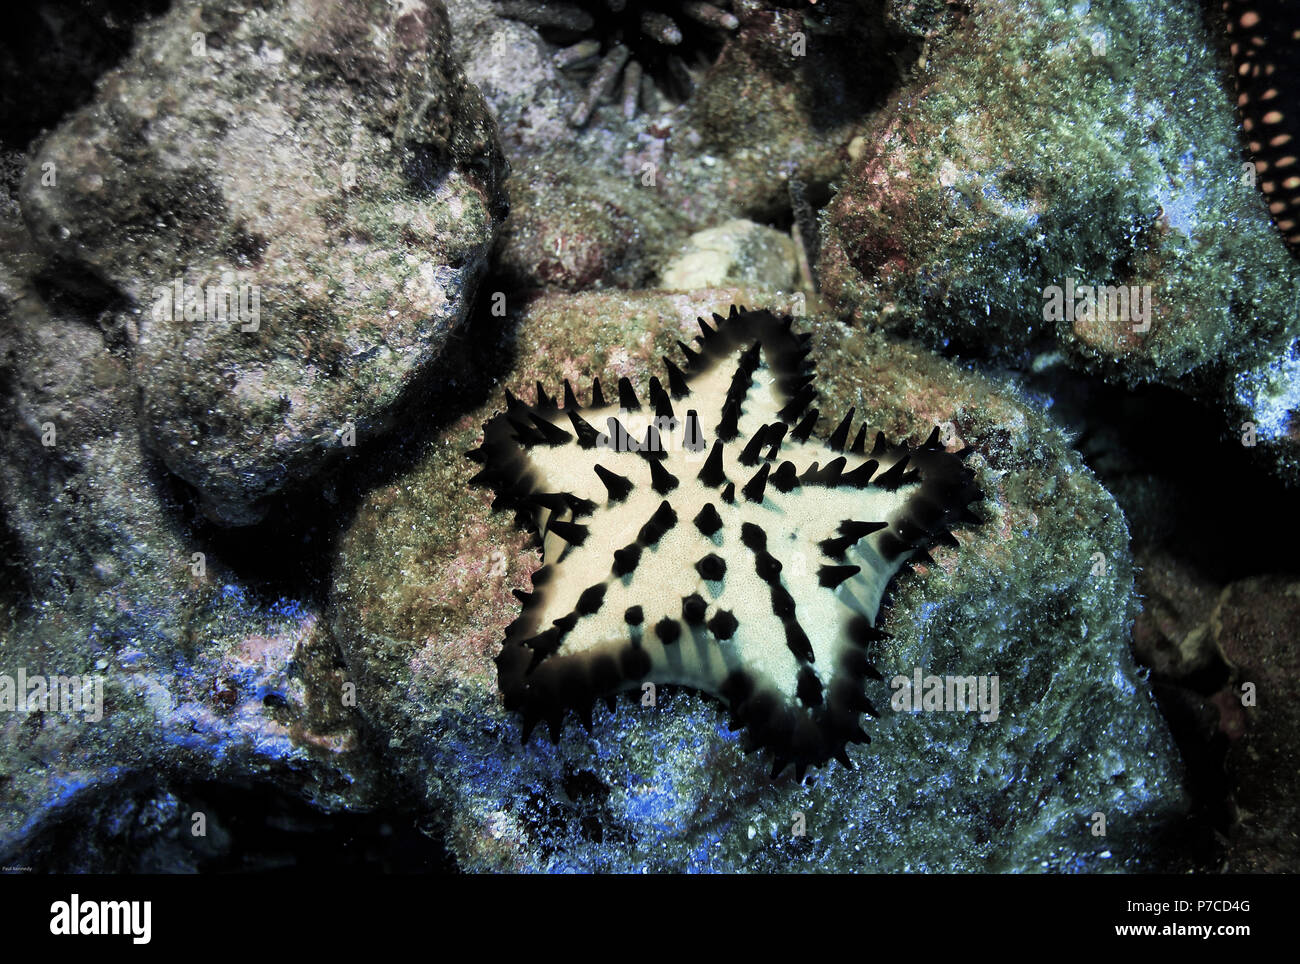 Chocolate chip sea star (Protoreaster nodosus) underwater in the Galapagos Islands Stock Photo